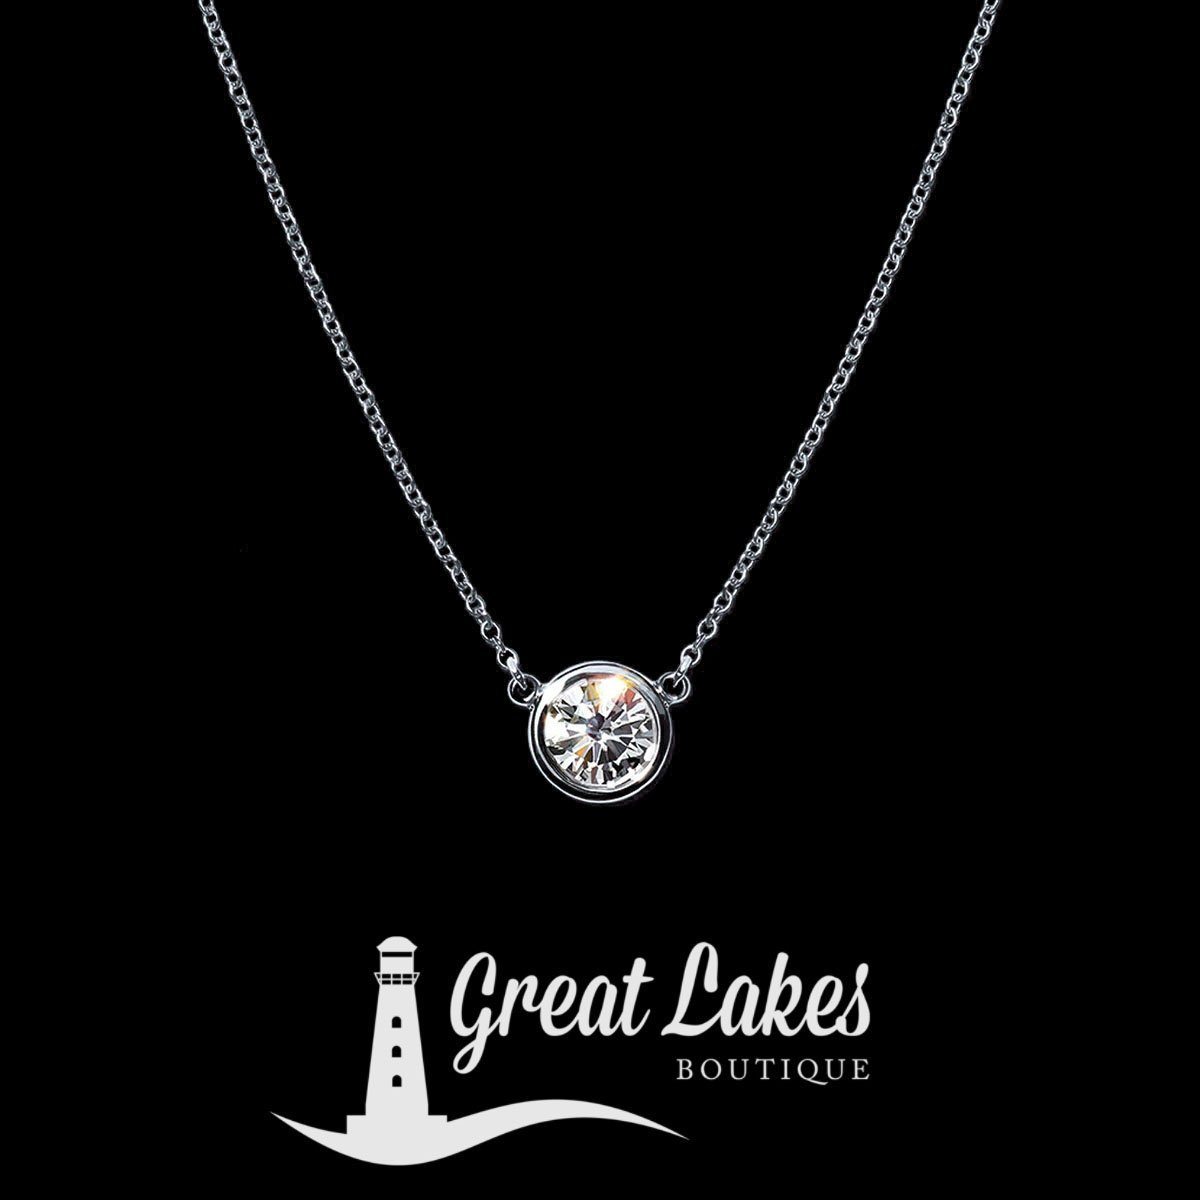 Great Lakes Boutique White Gold & Diamond Necklace